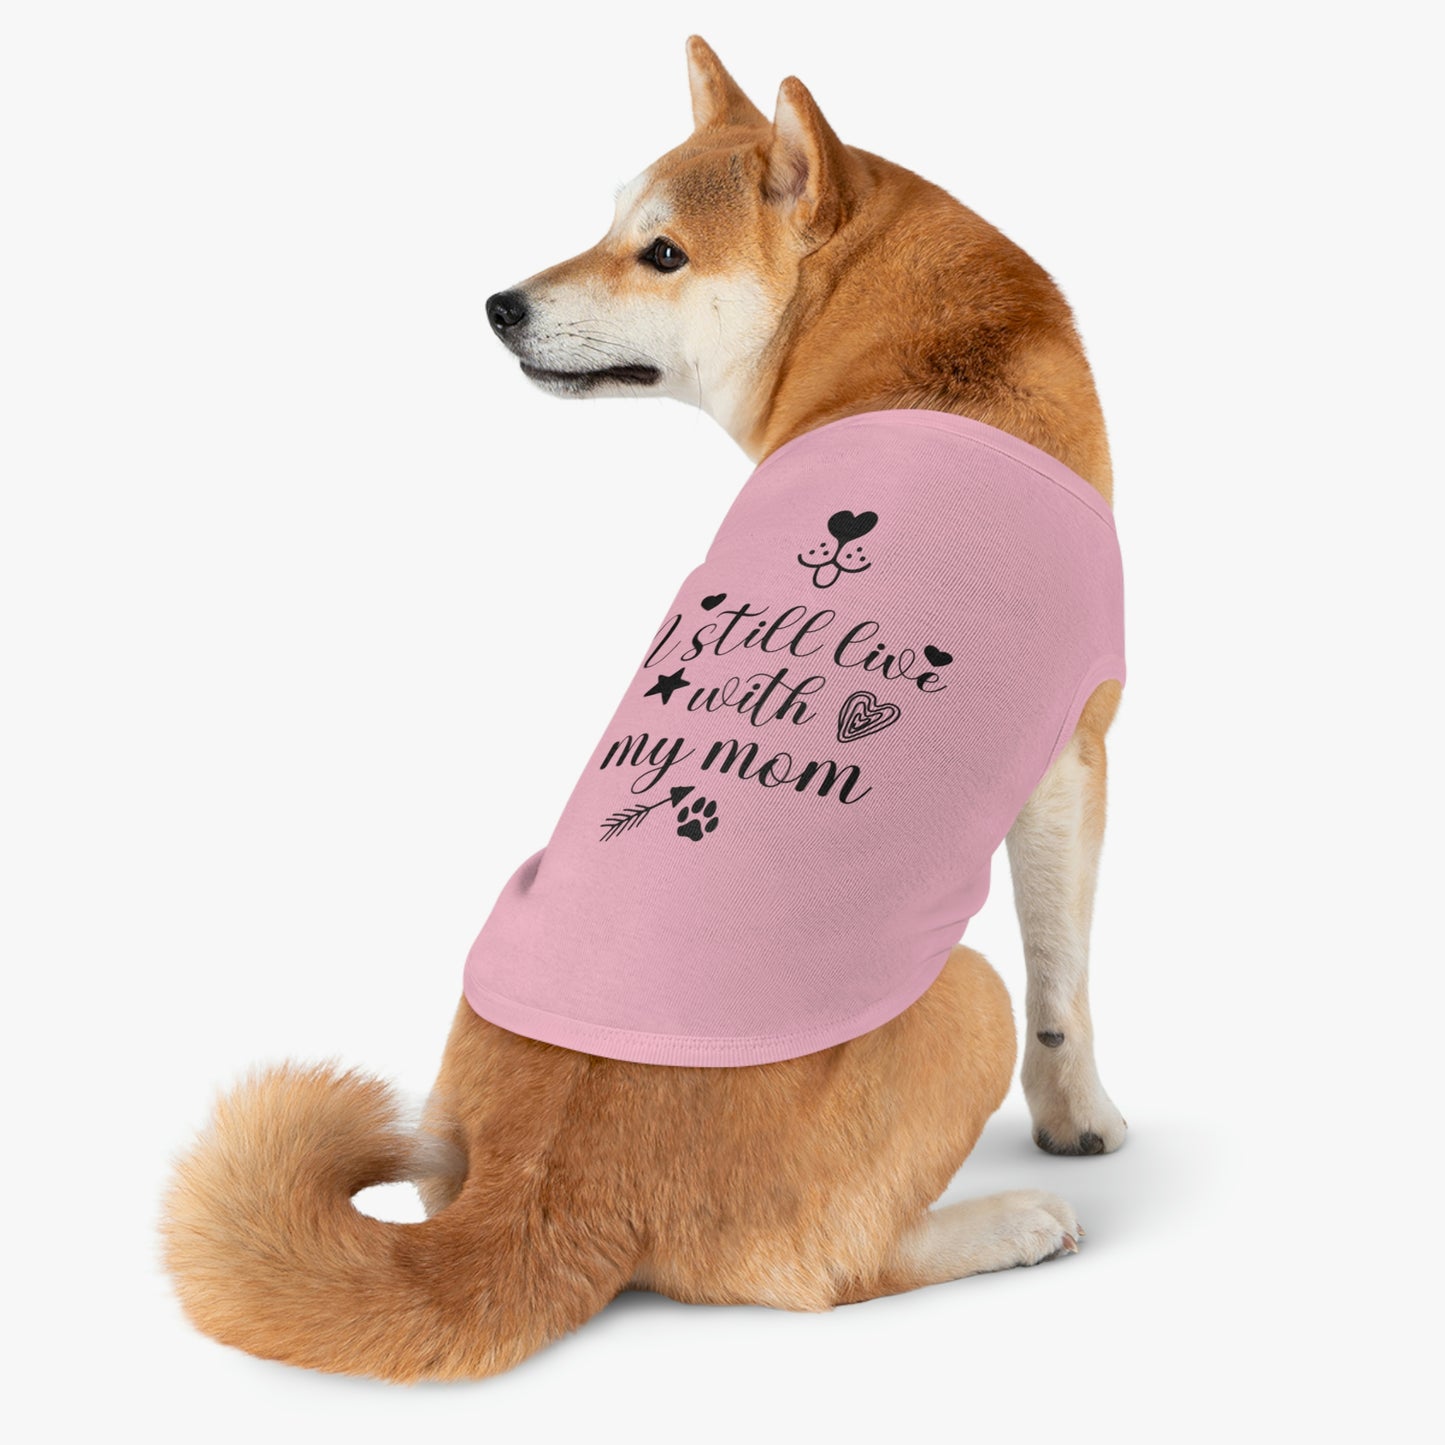 I still live with my mom Dog Pet Tank Top Cute Pet Clothes